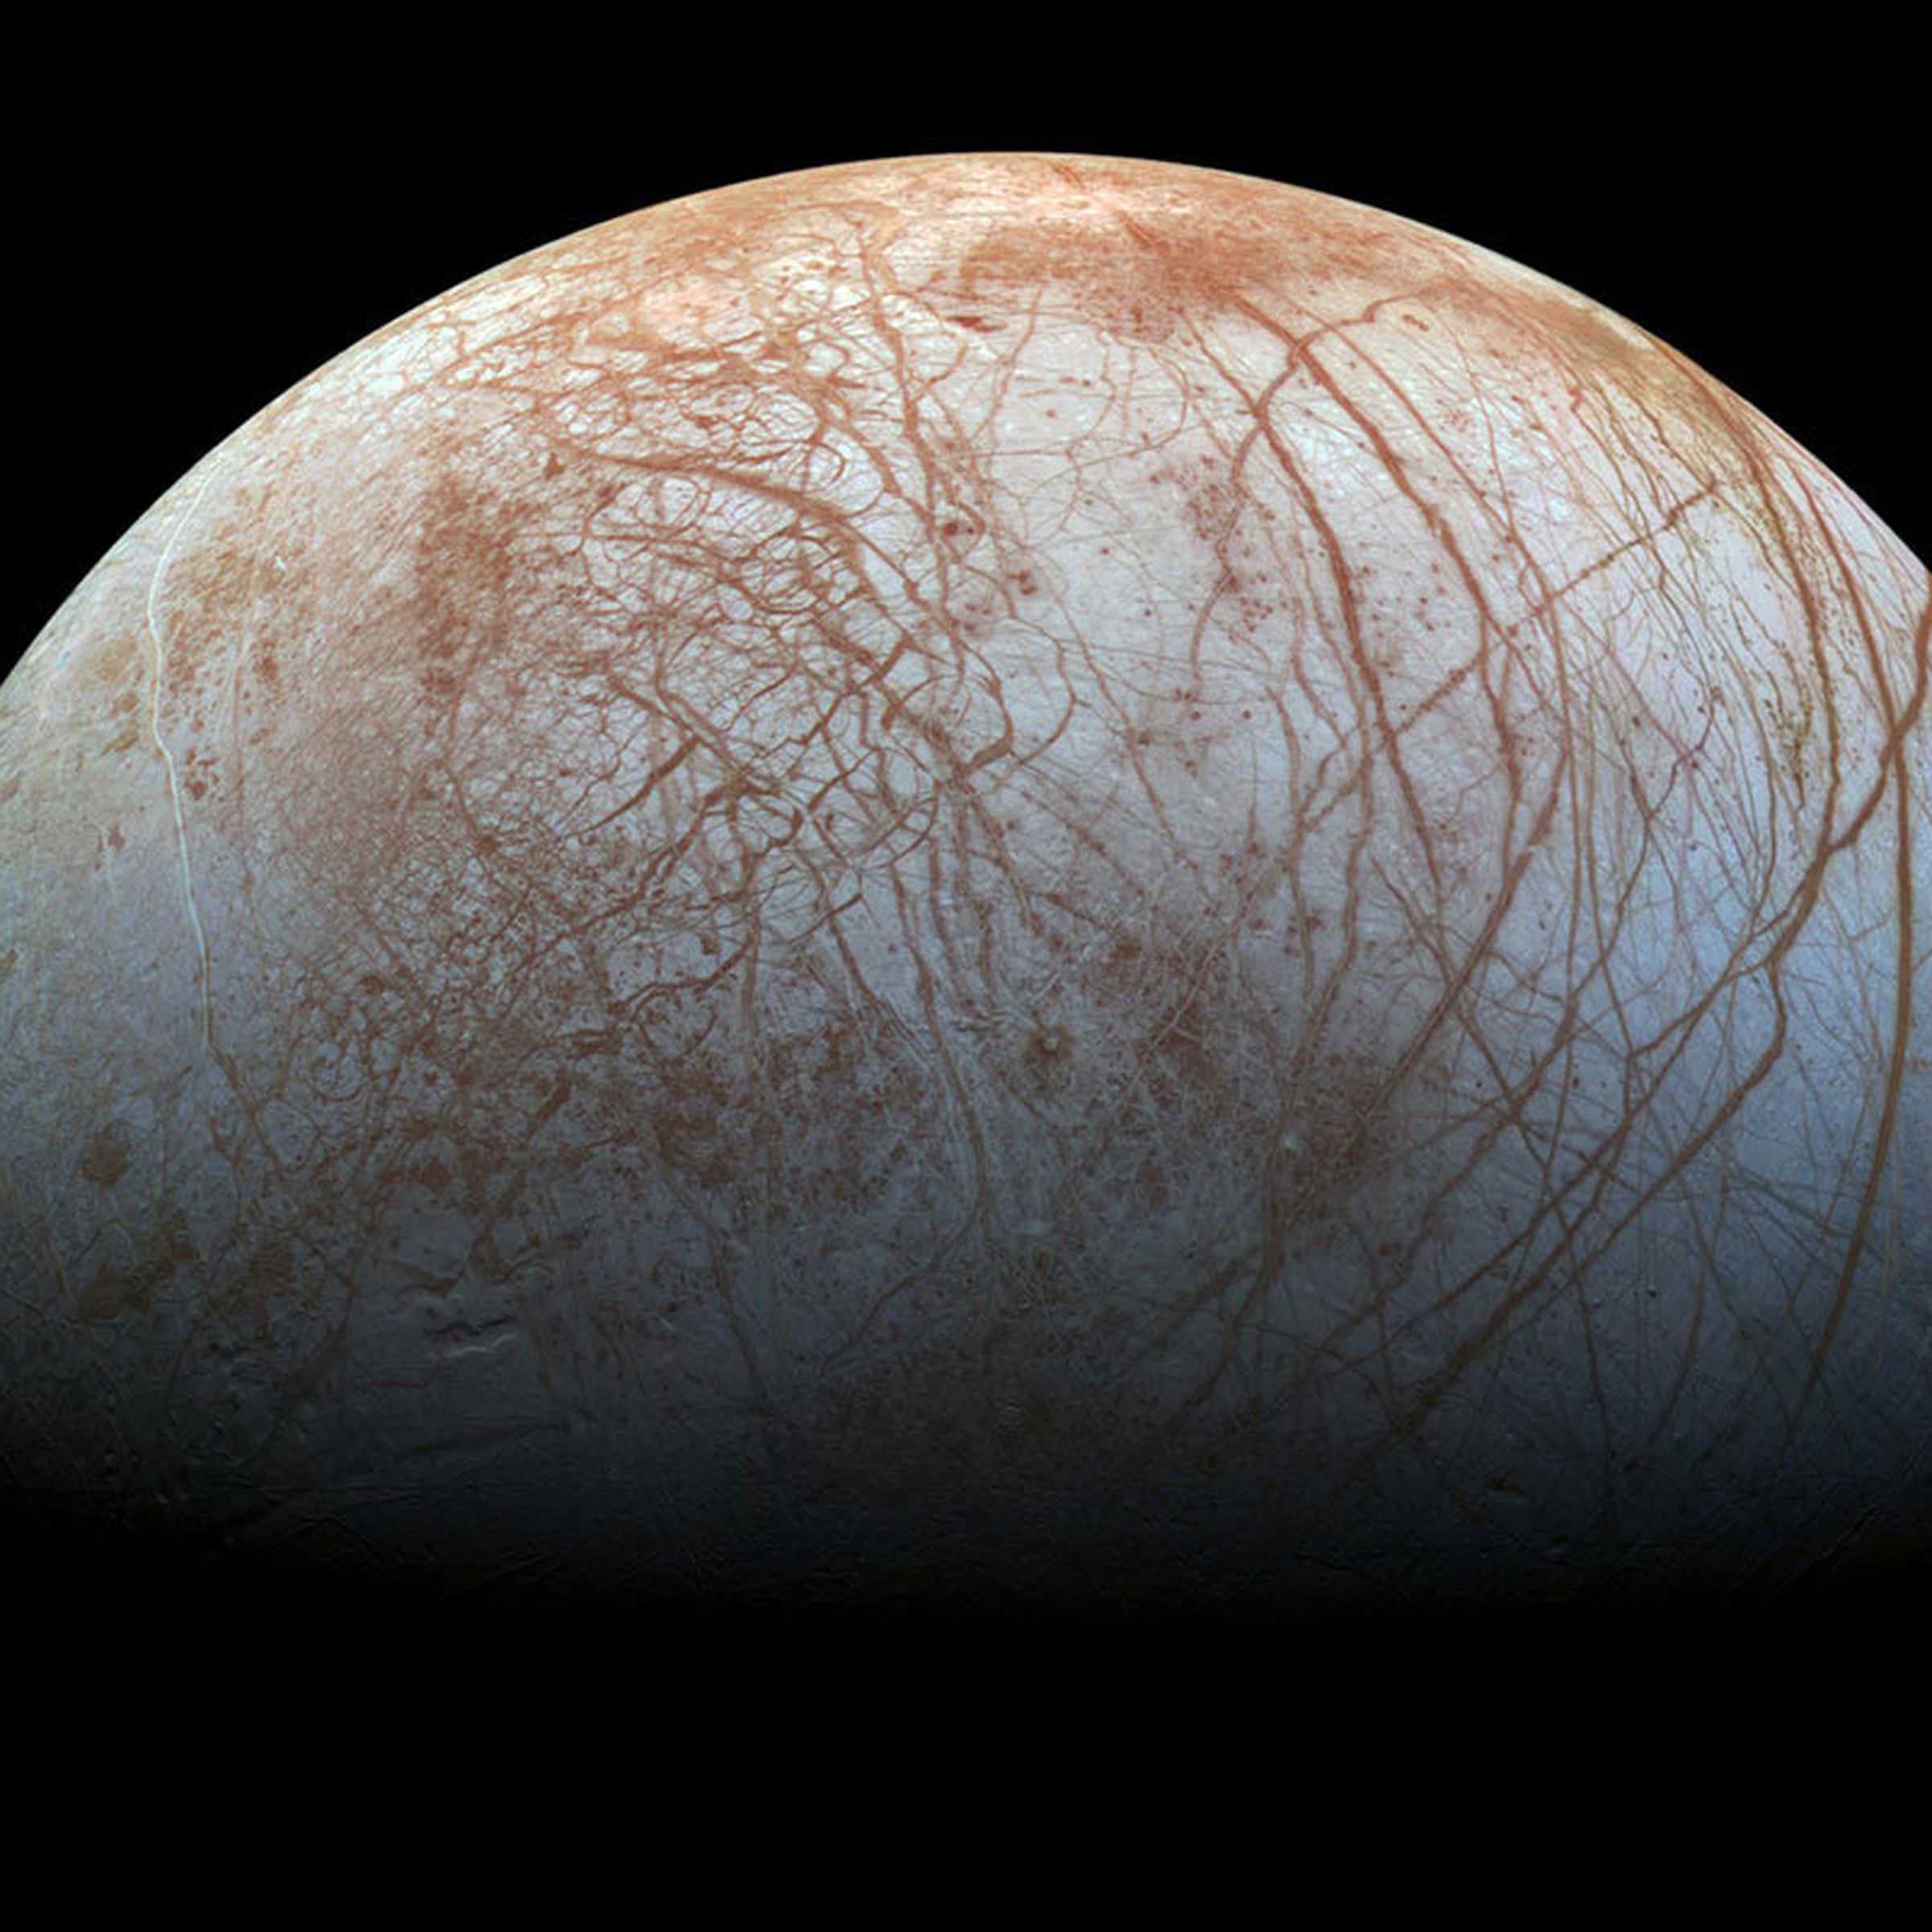 Jupiter’s icy moon Europa, as seen from the Galileo spacecraft